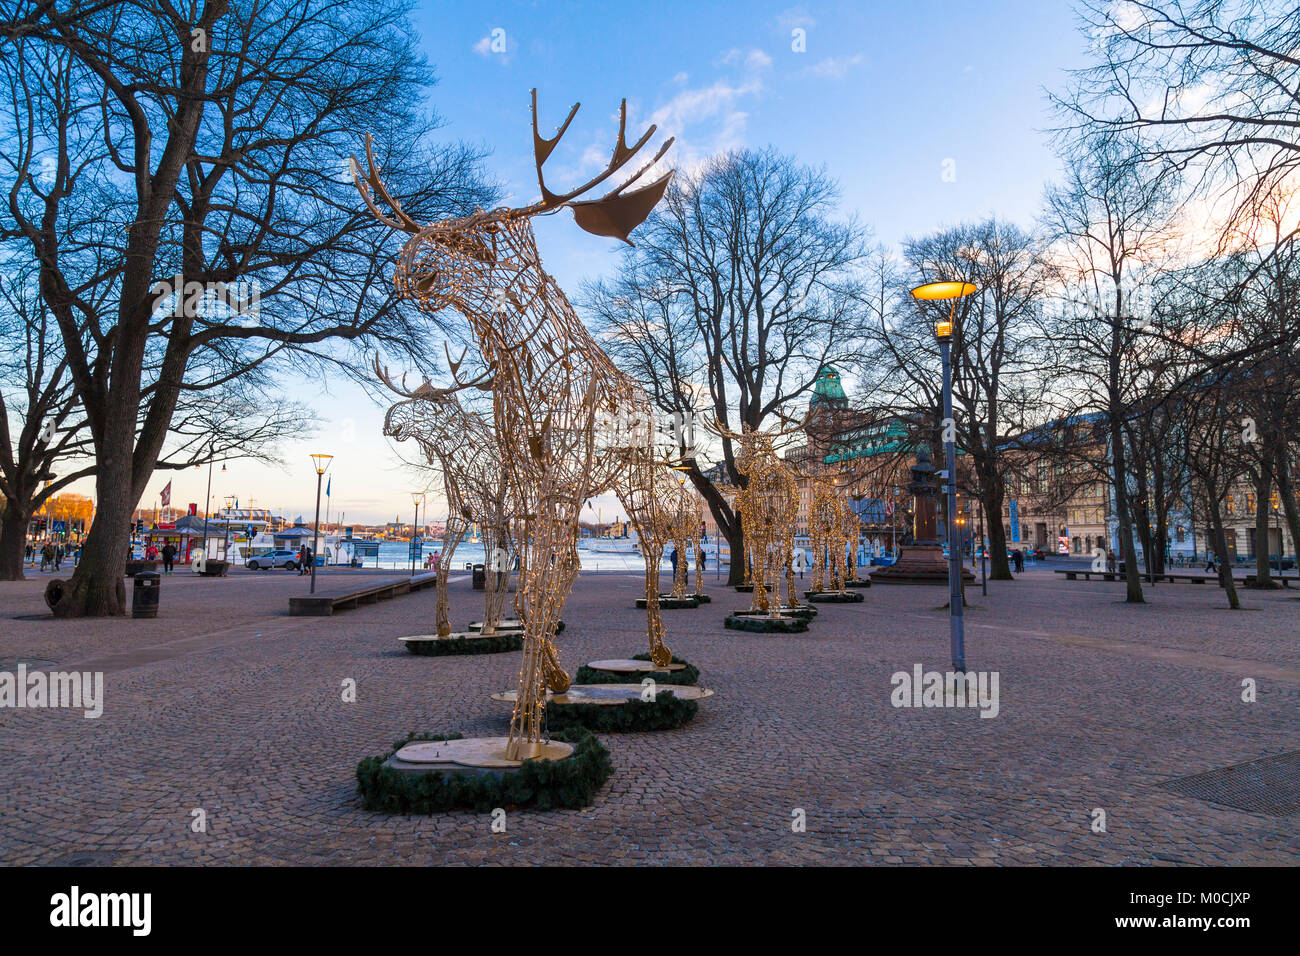 Moose sculptures made of fairy lights decorating Nybroplan for the Christmas season in Stockholm, Sweden Stock Photo